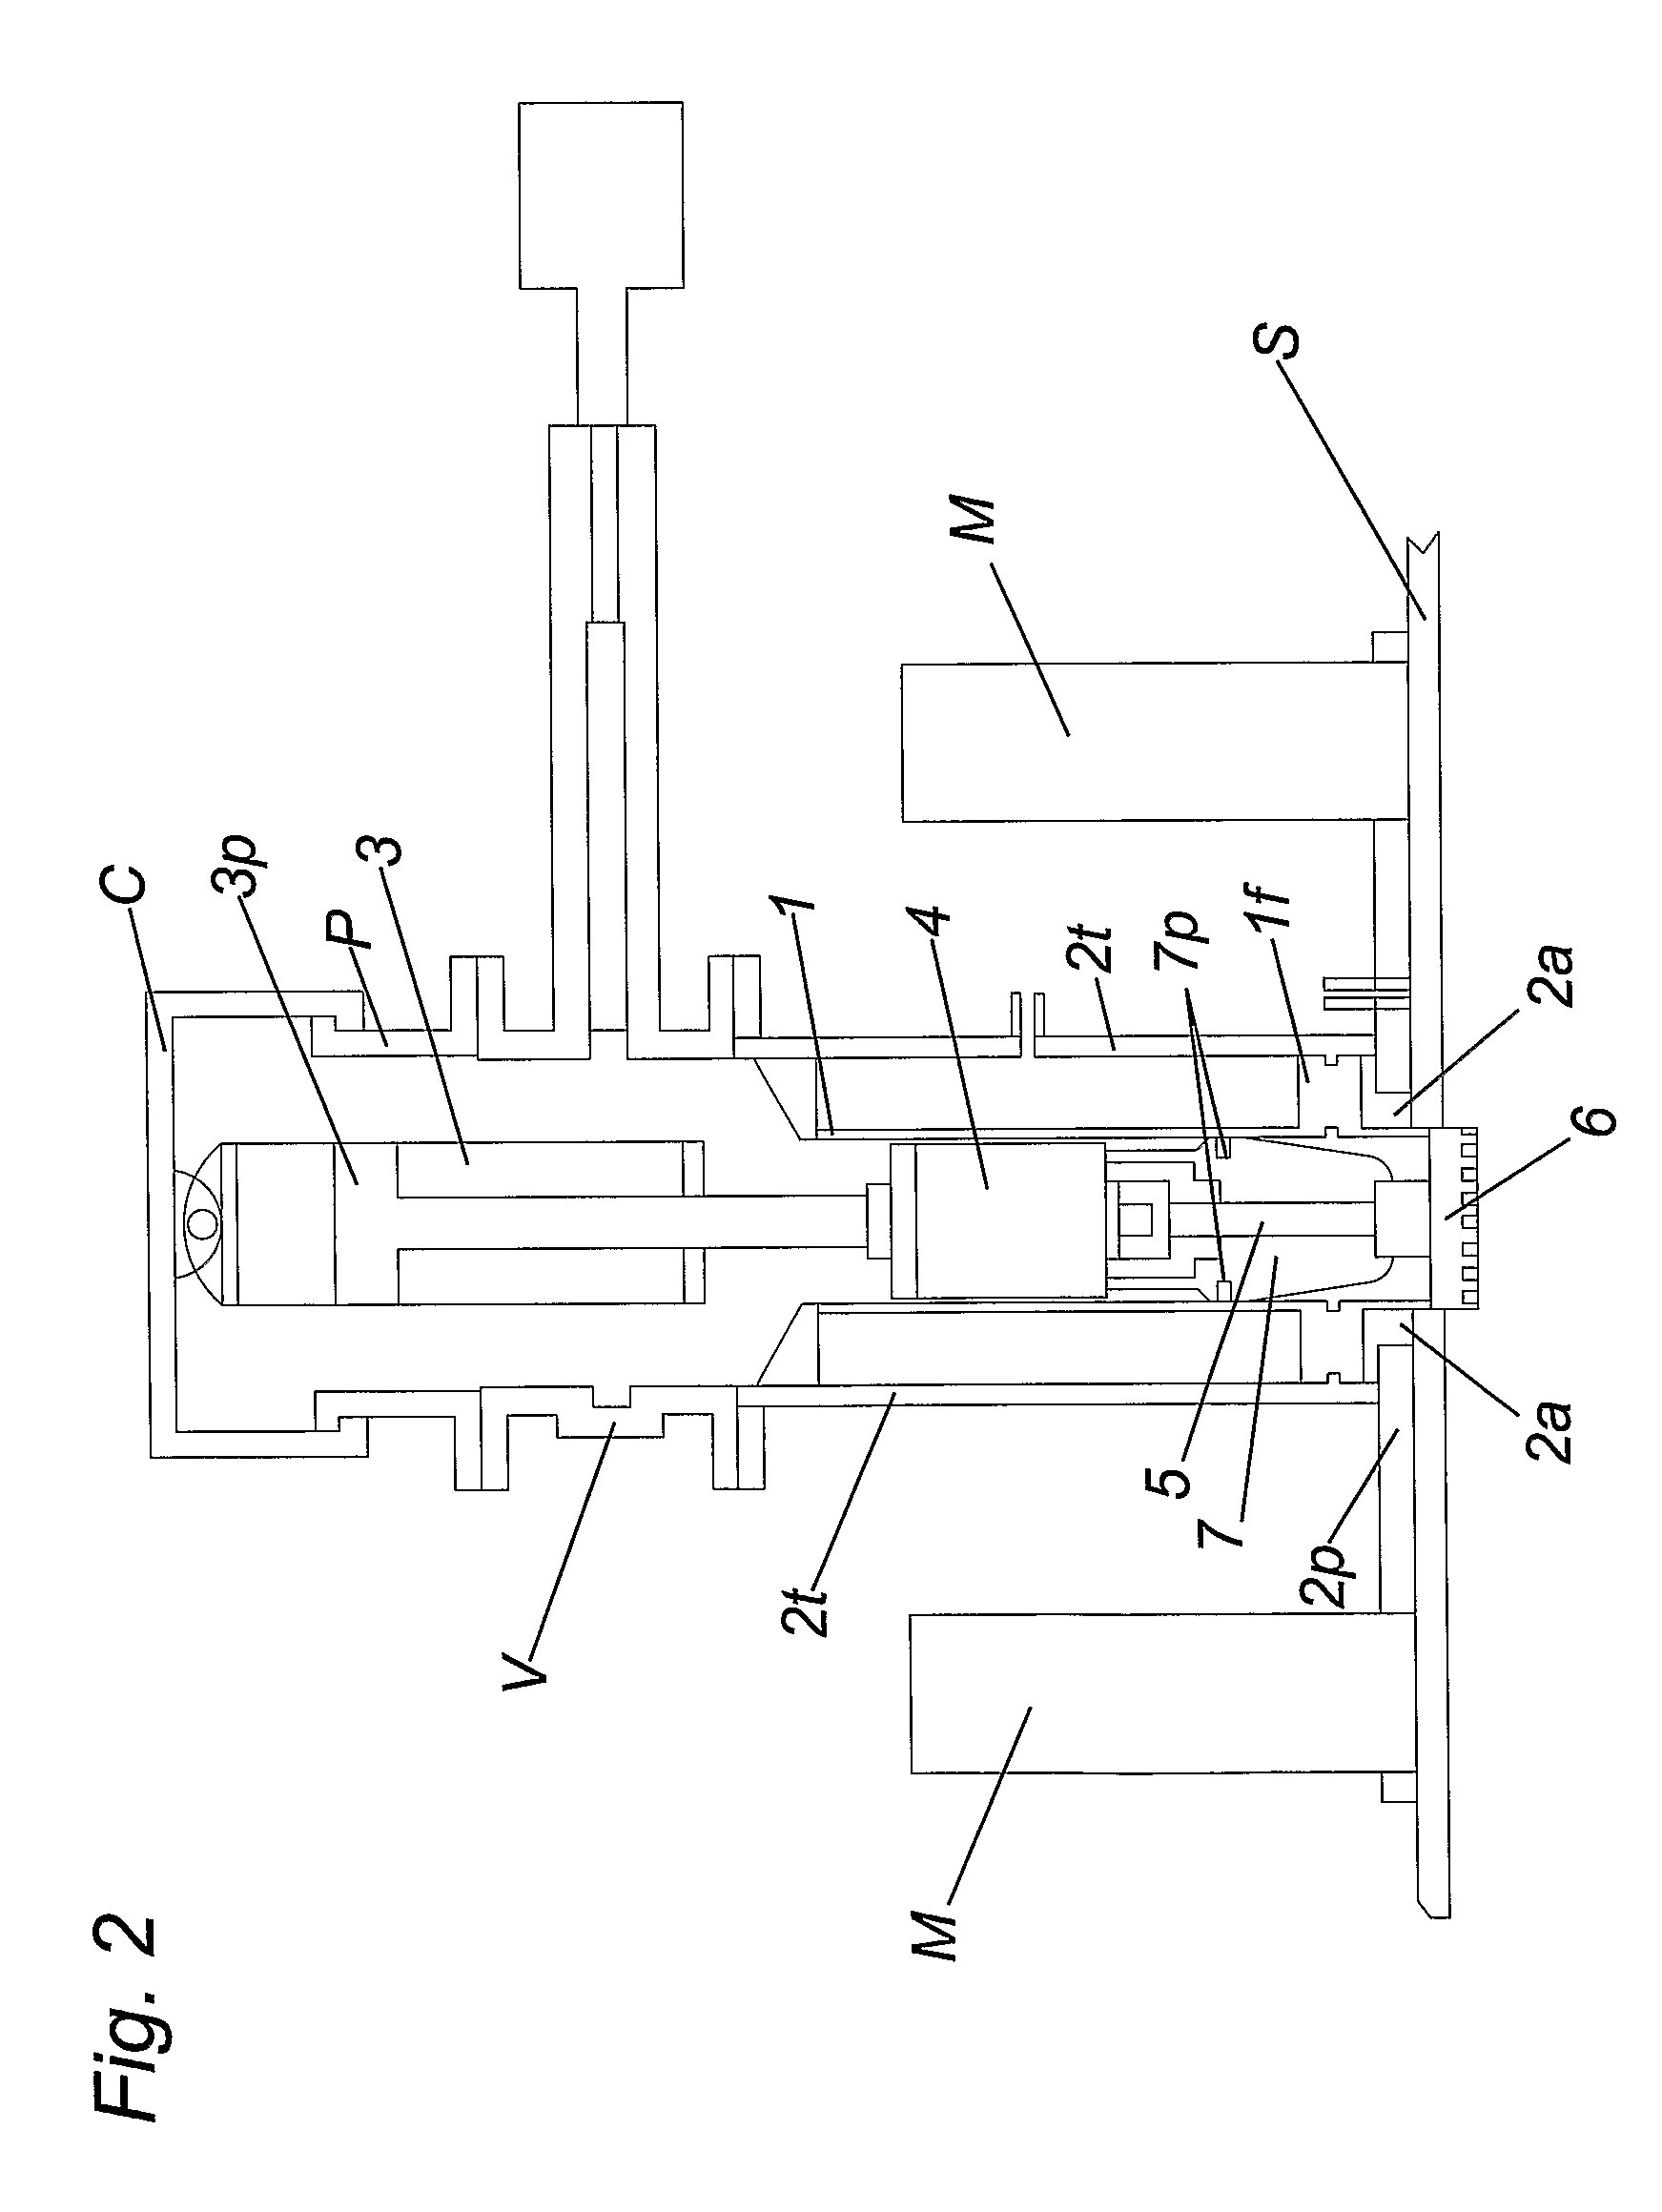 Method and apparatus for securing a conduit to a structure